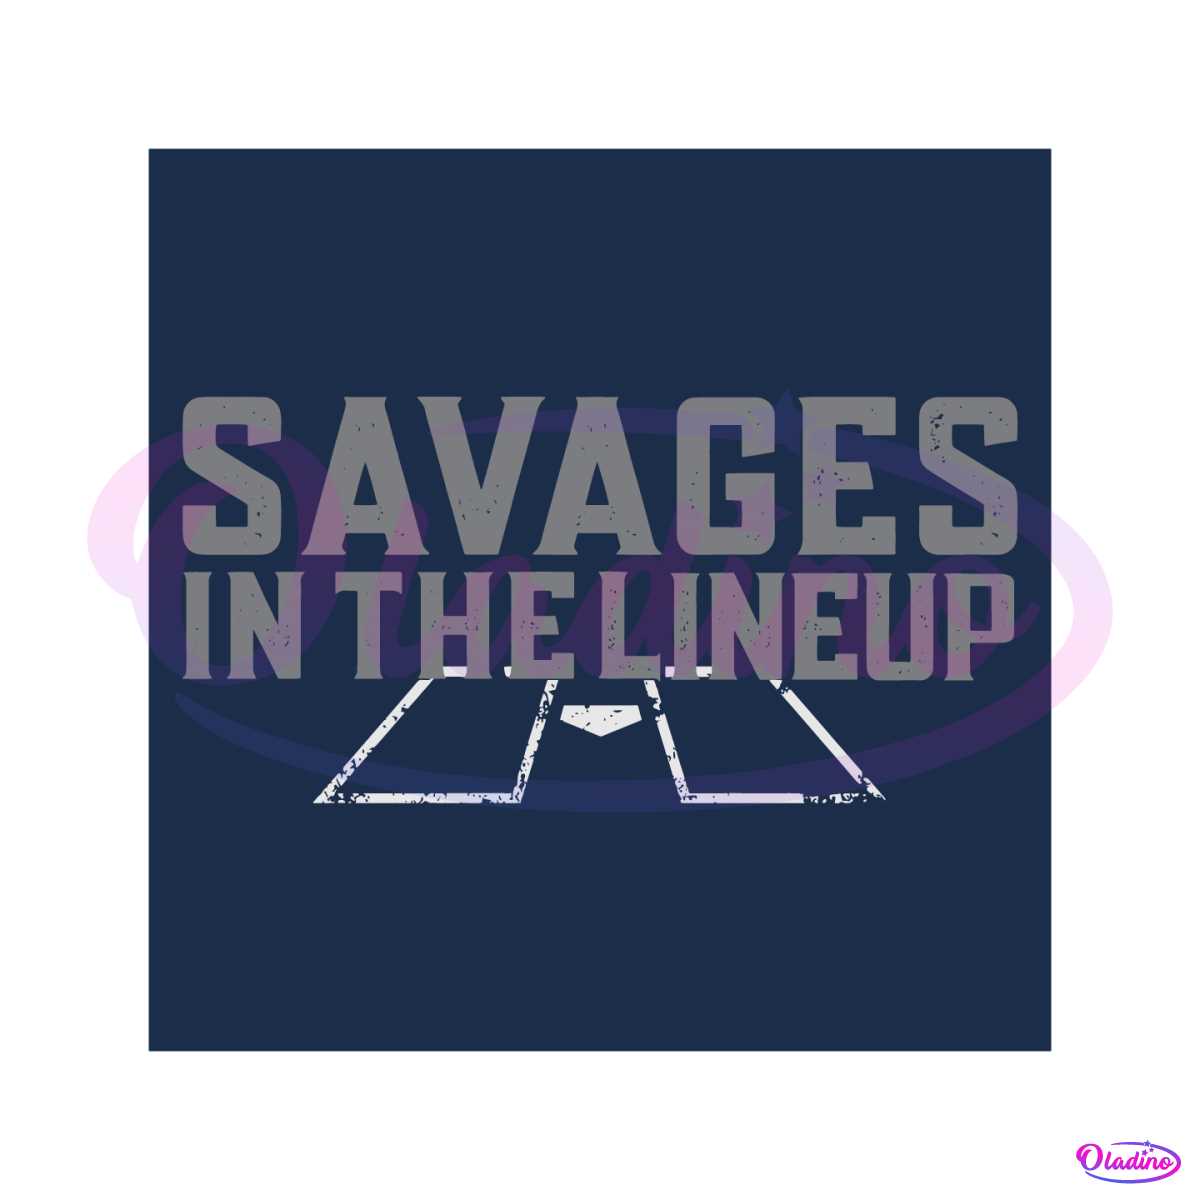 Aaron Boone Savages Shirt Yankees Savages T-Shirt Savages In That